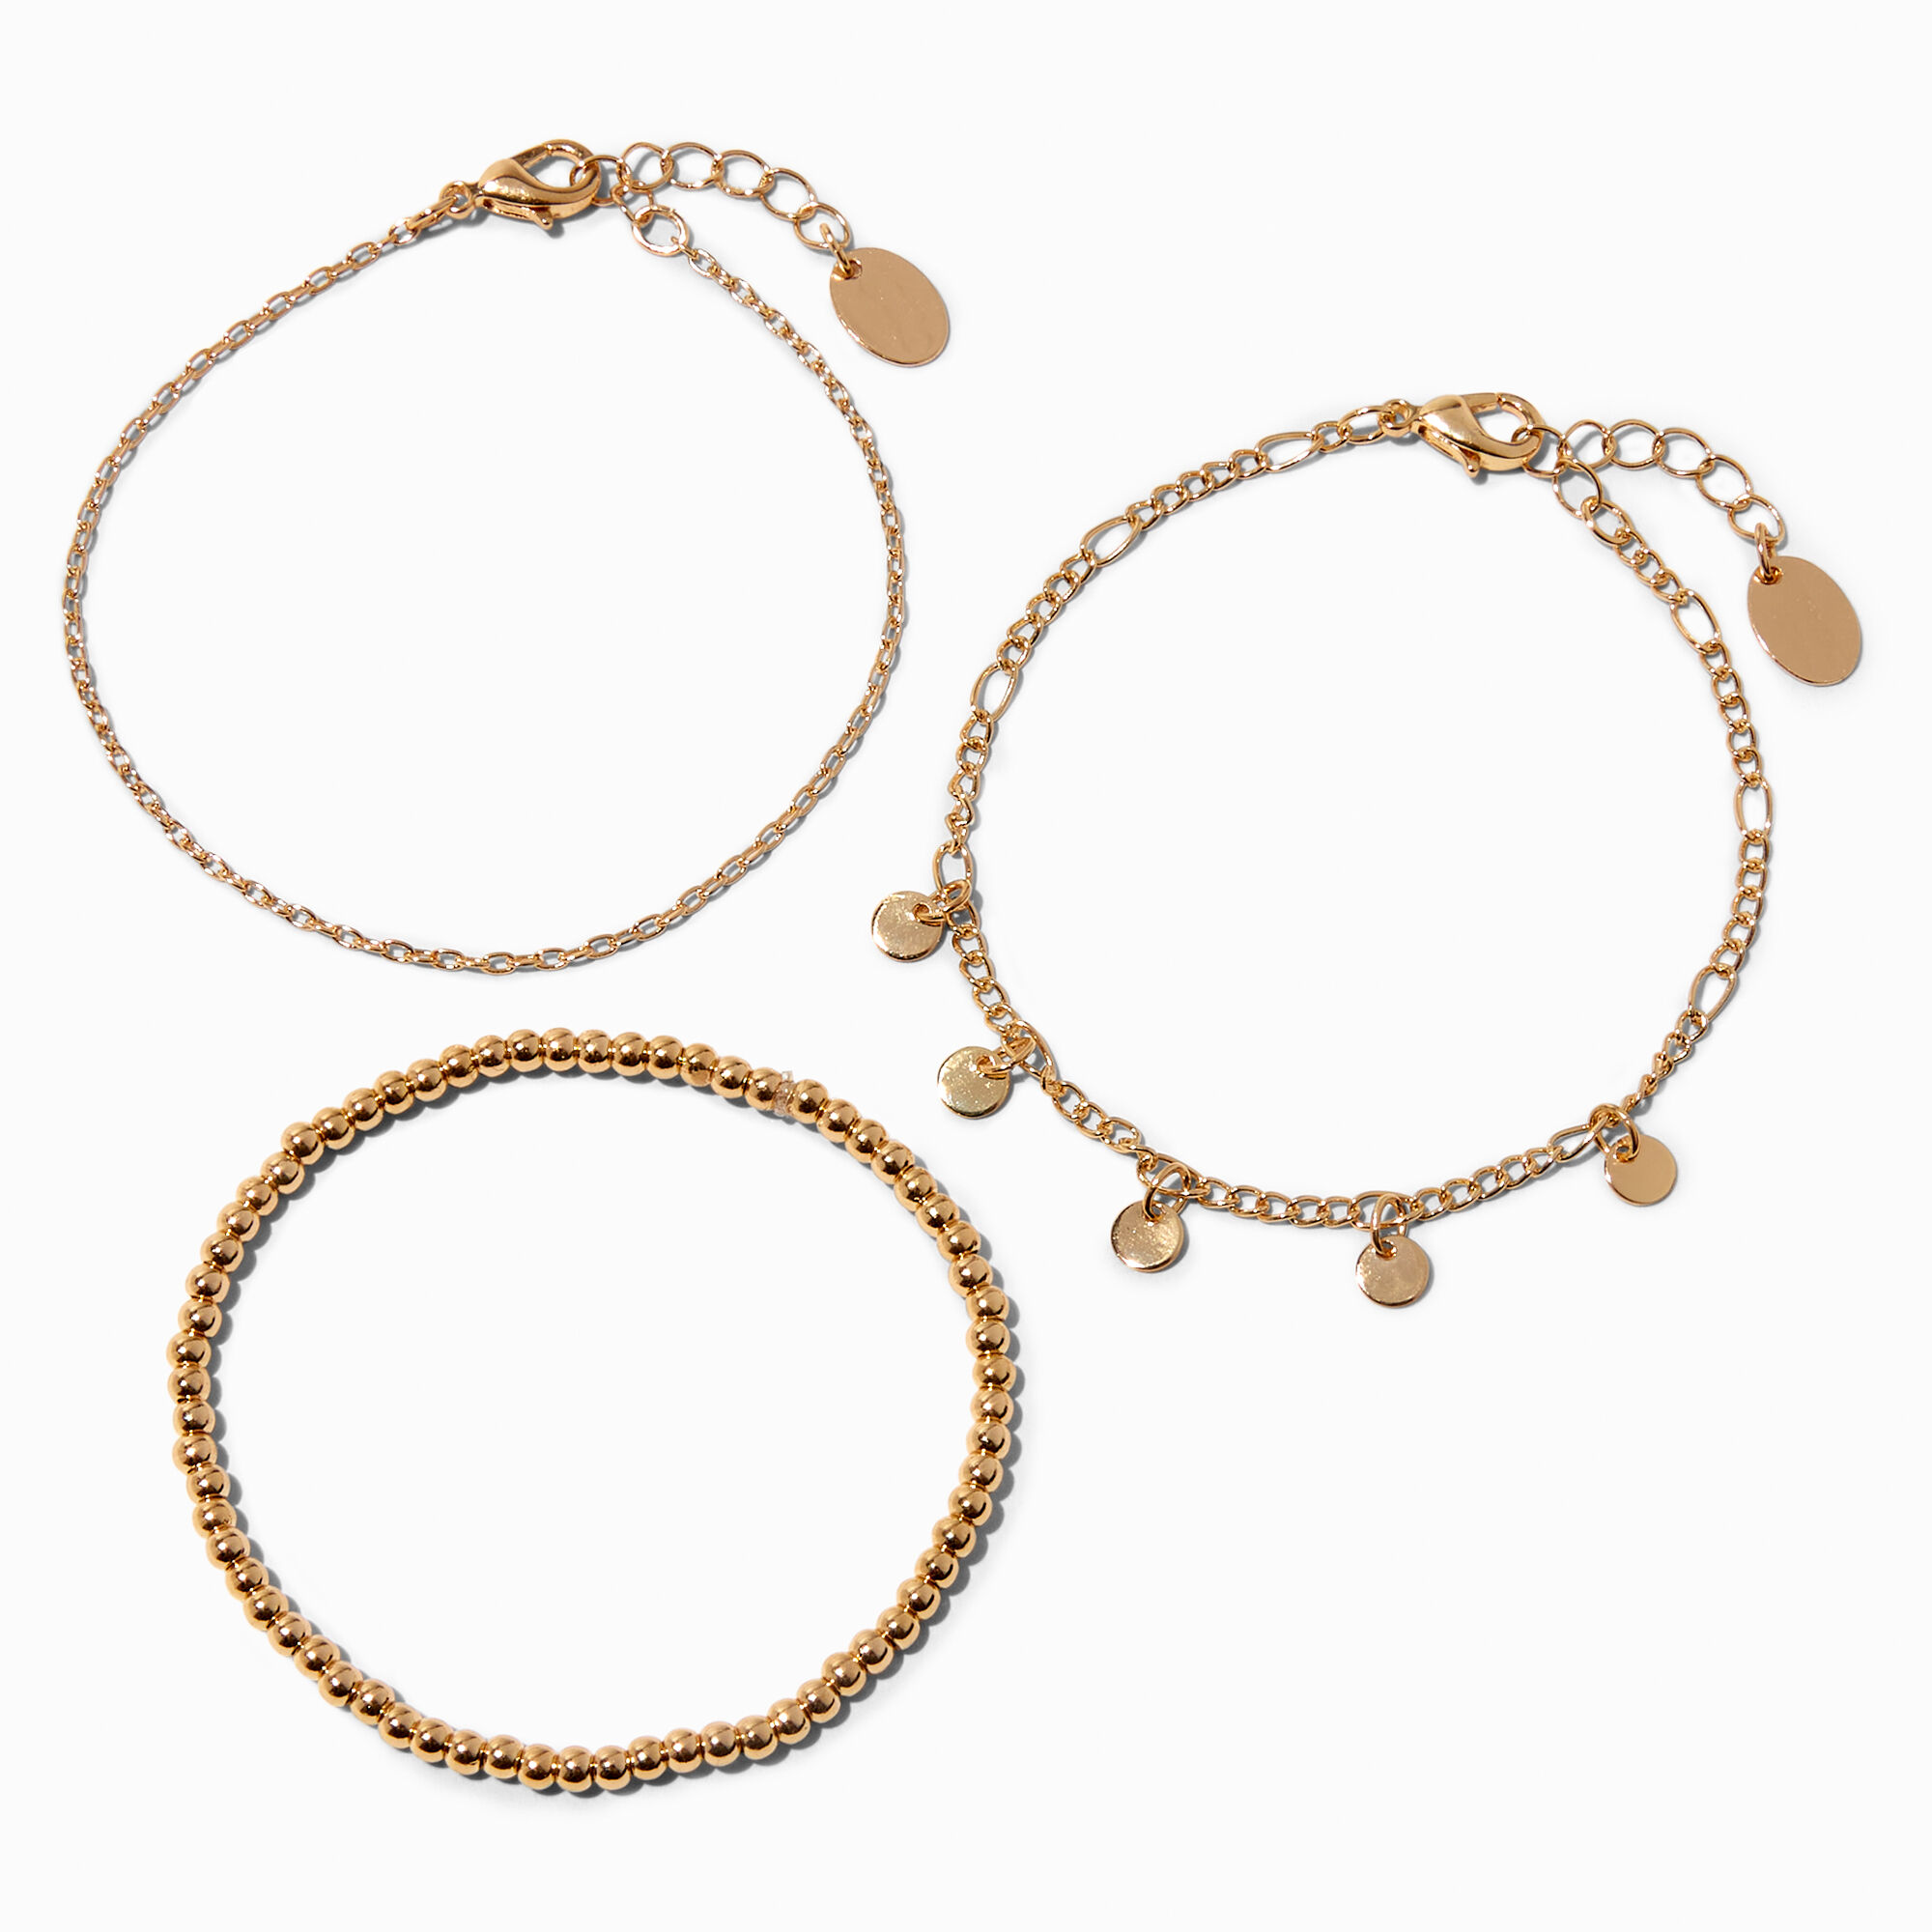 View Claires Recycled Jewelry Tone Disc Charm Bracelet Set 3 Pack Gold information